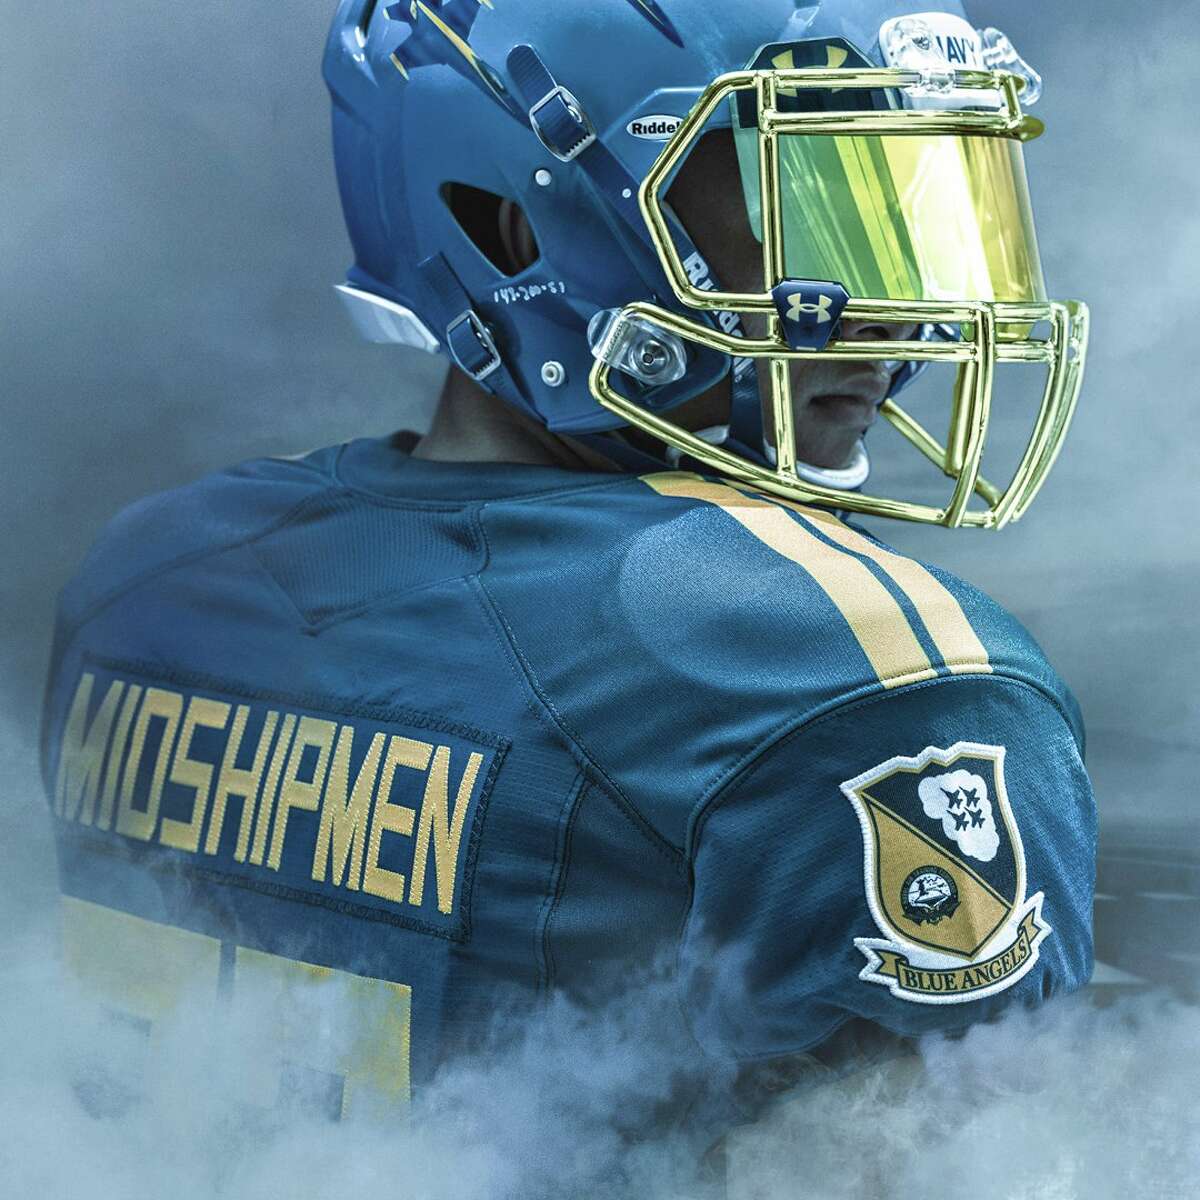 The U.S. Navy recently revealed the uniform of its football team, the Navy Midshipmen.